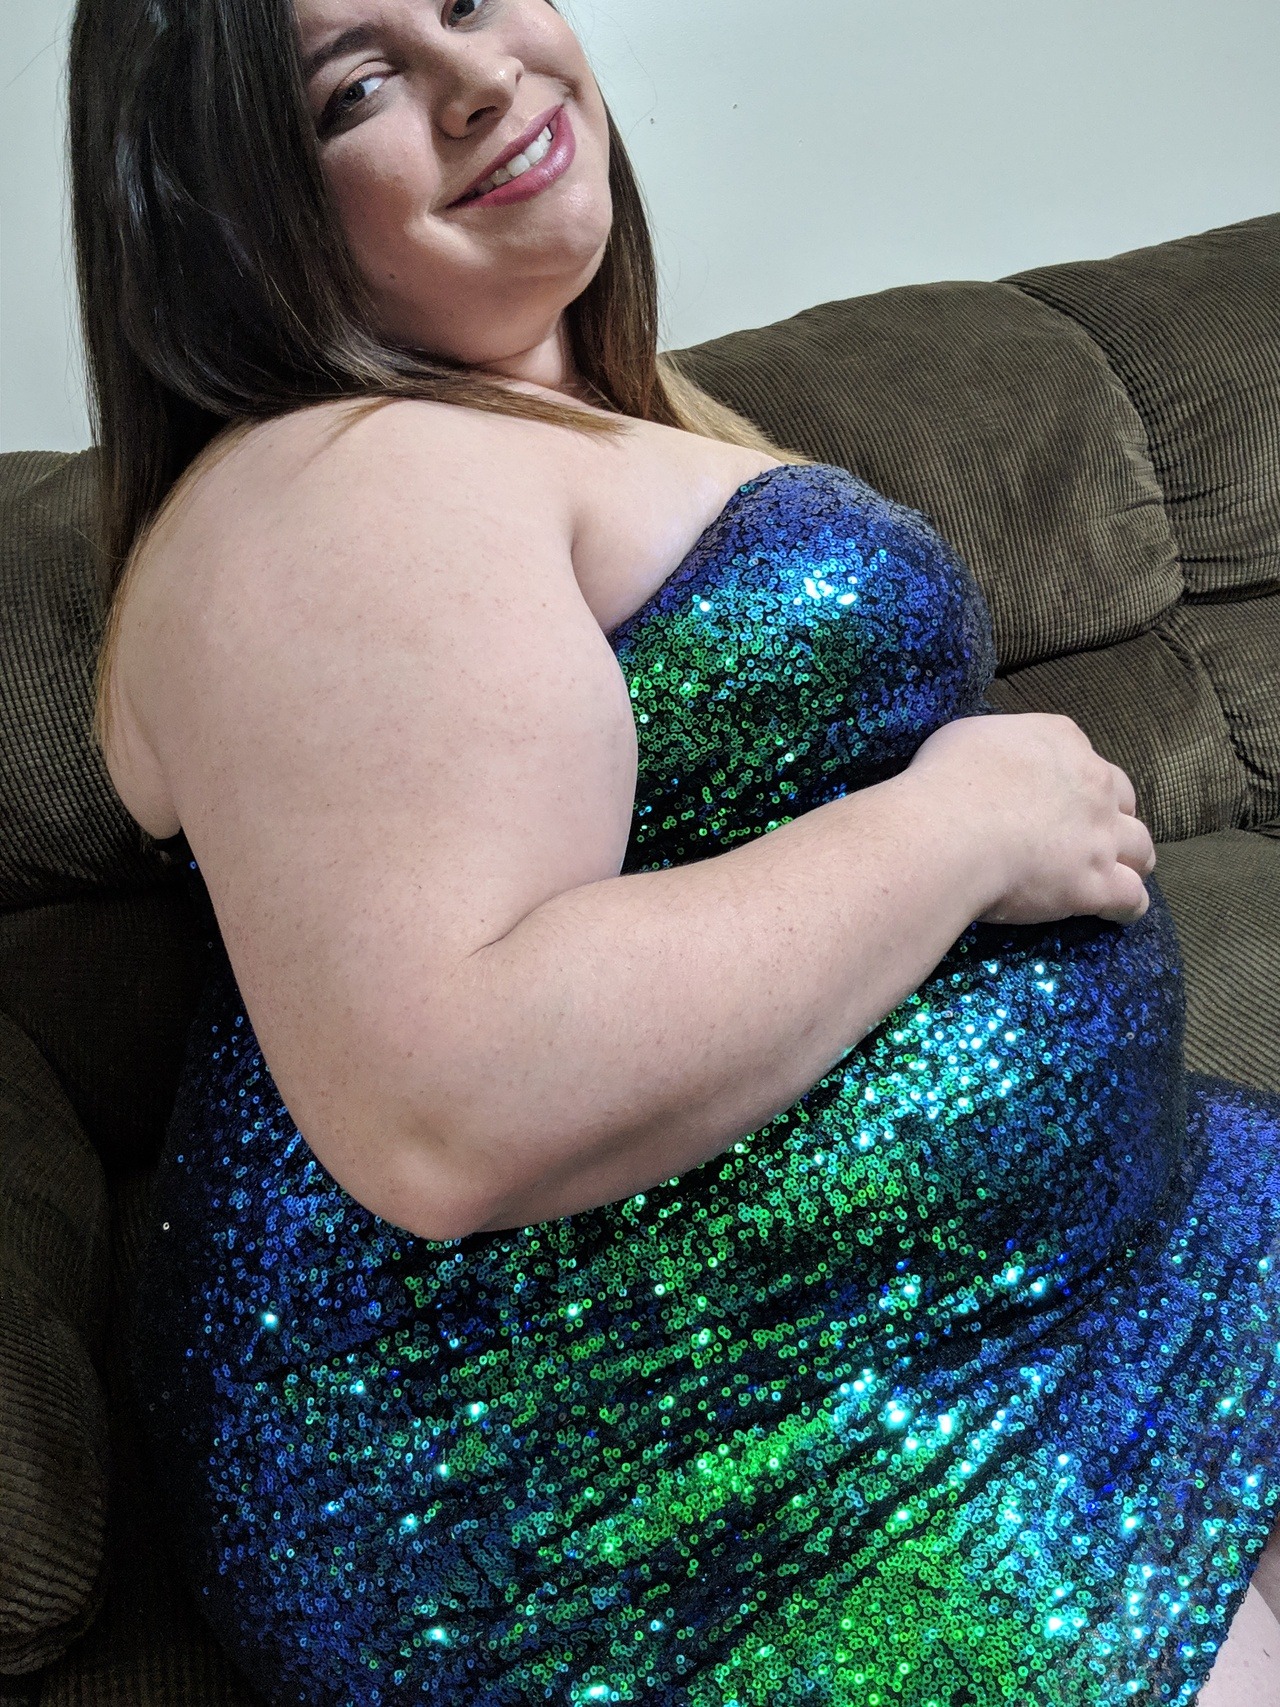 reybbw:  Not as tight as my new year’s dress but I loooove this! Can’t wait for